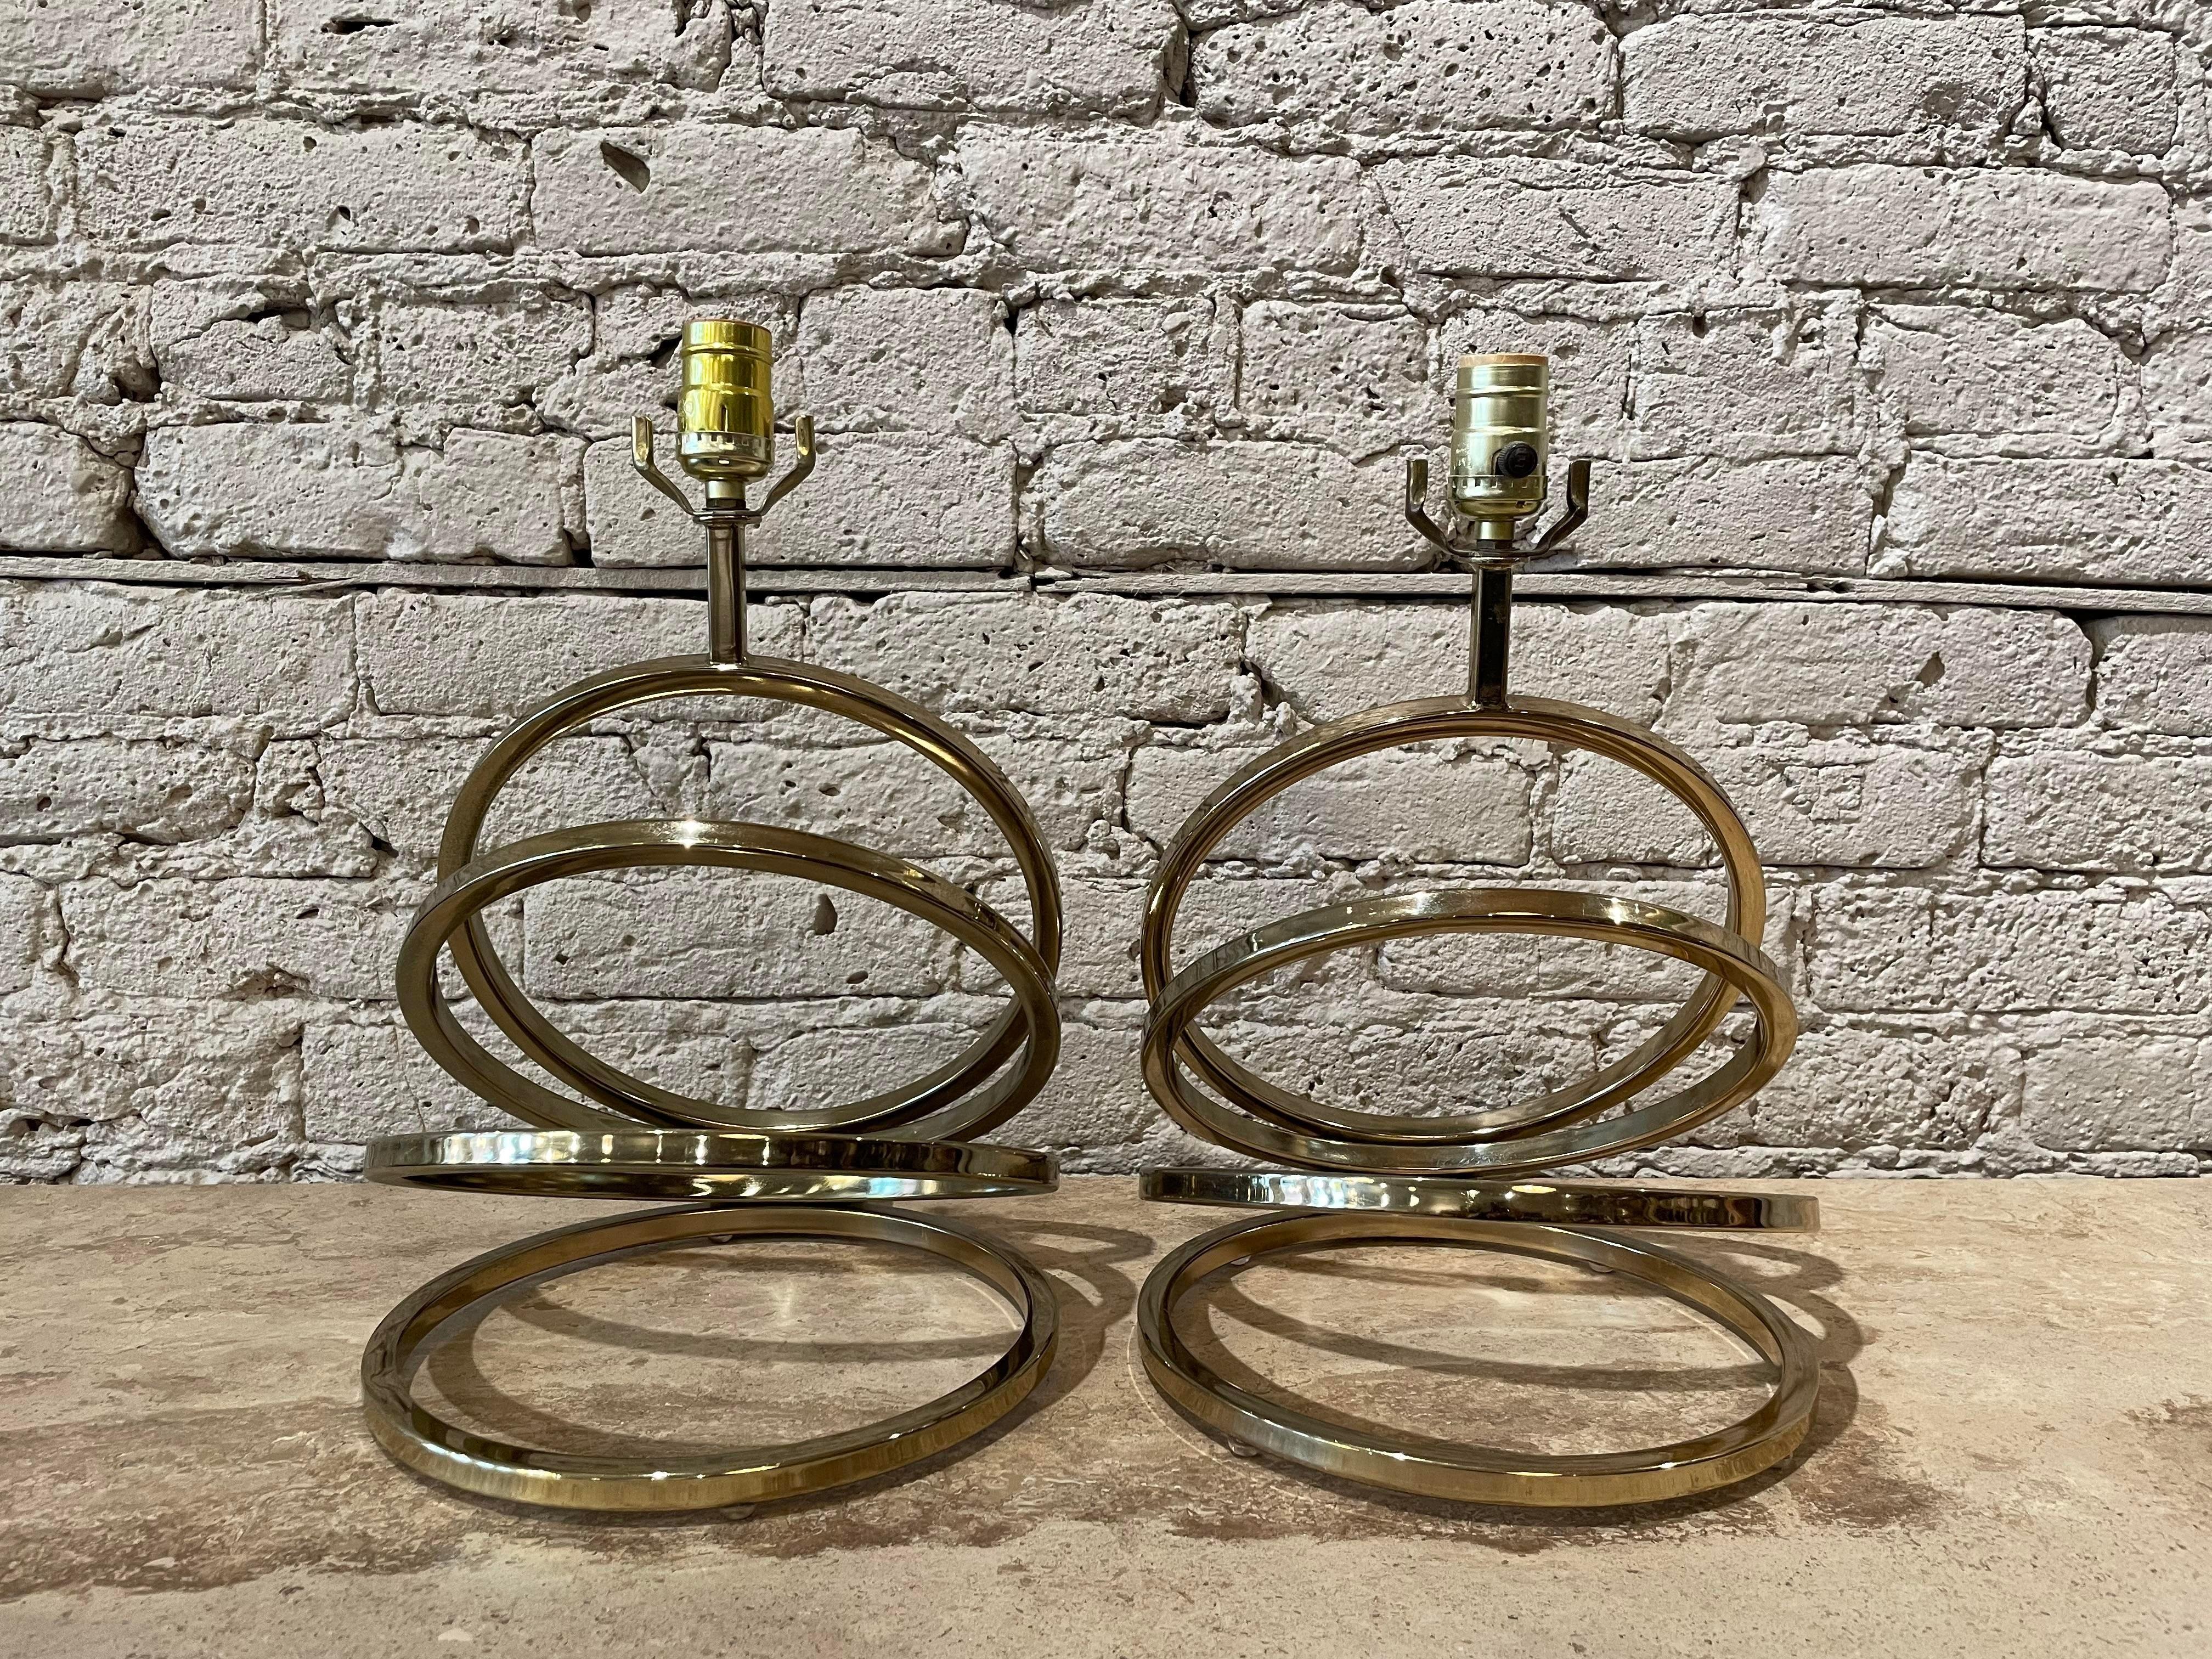 1960s Hollywood Regency Mid Century Vintage Brass Spiral Lamps - a Pair For Sale 5